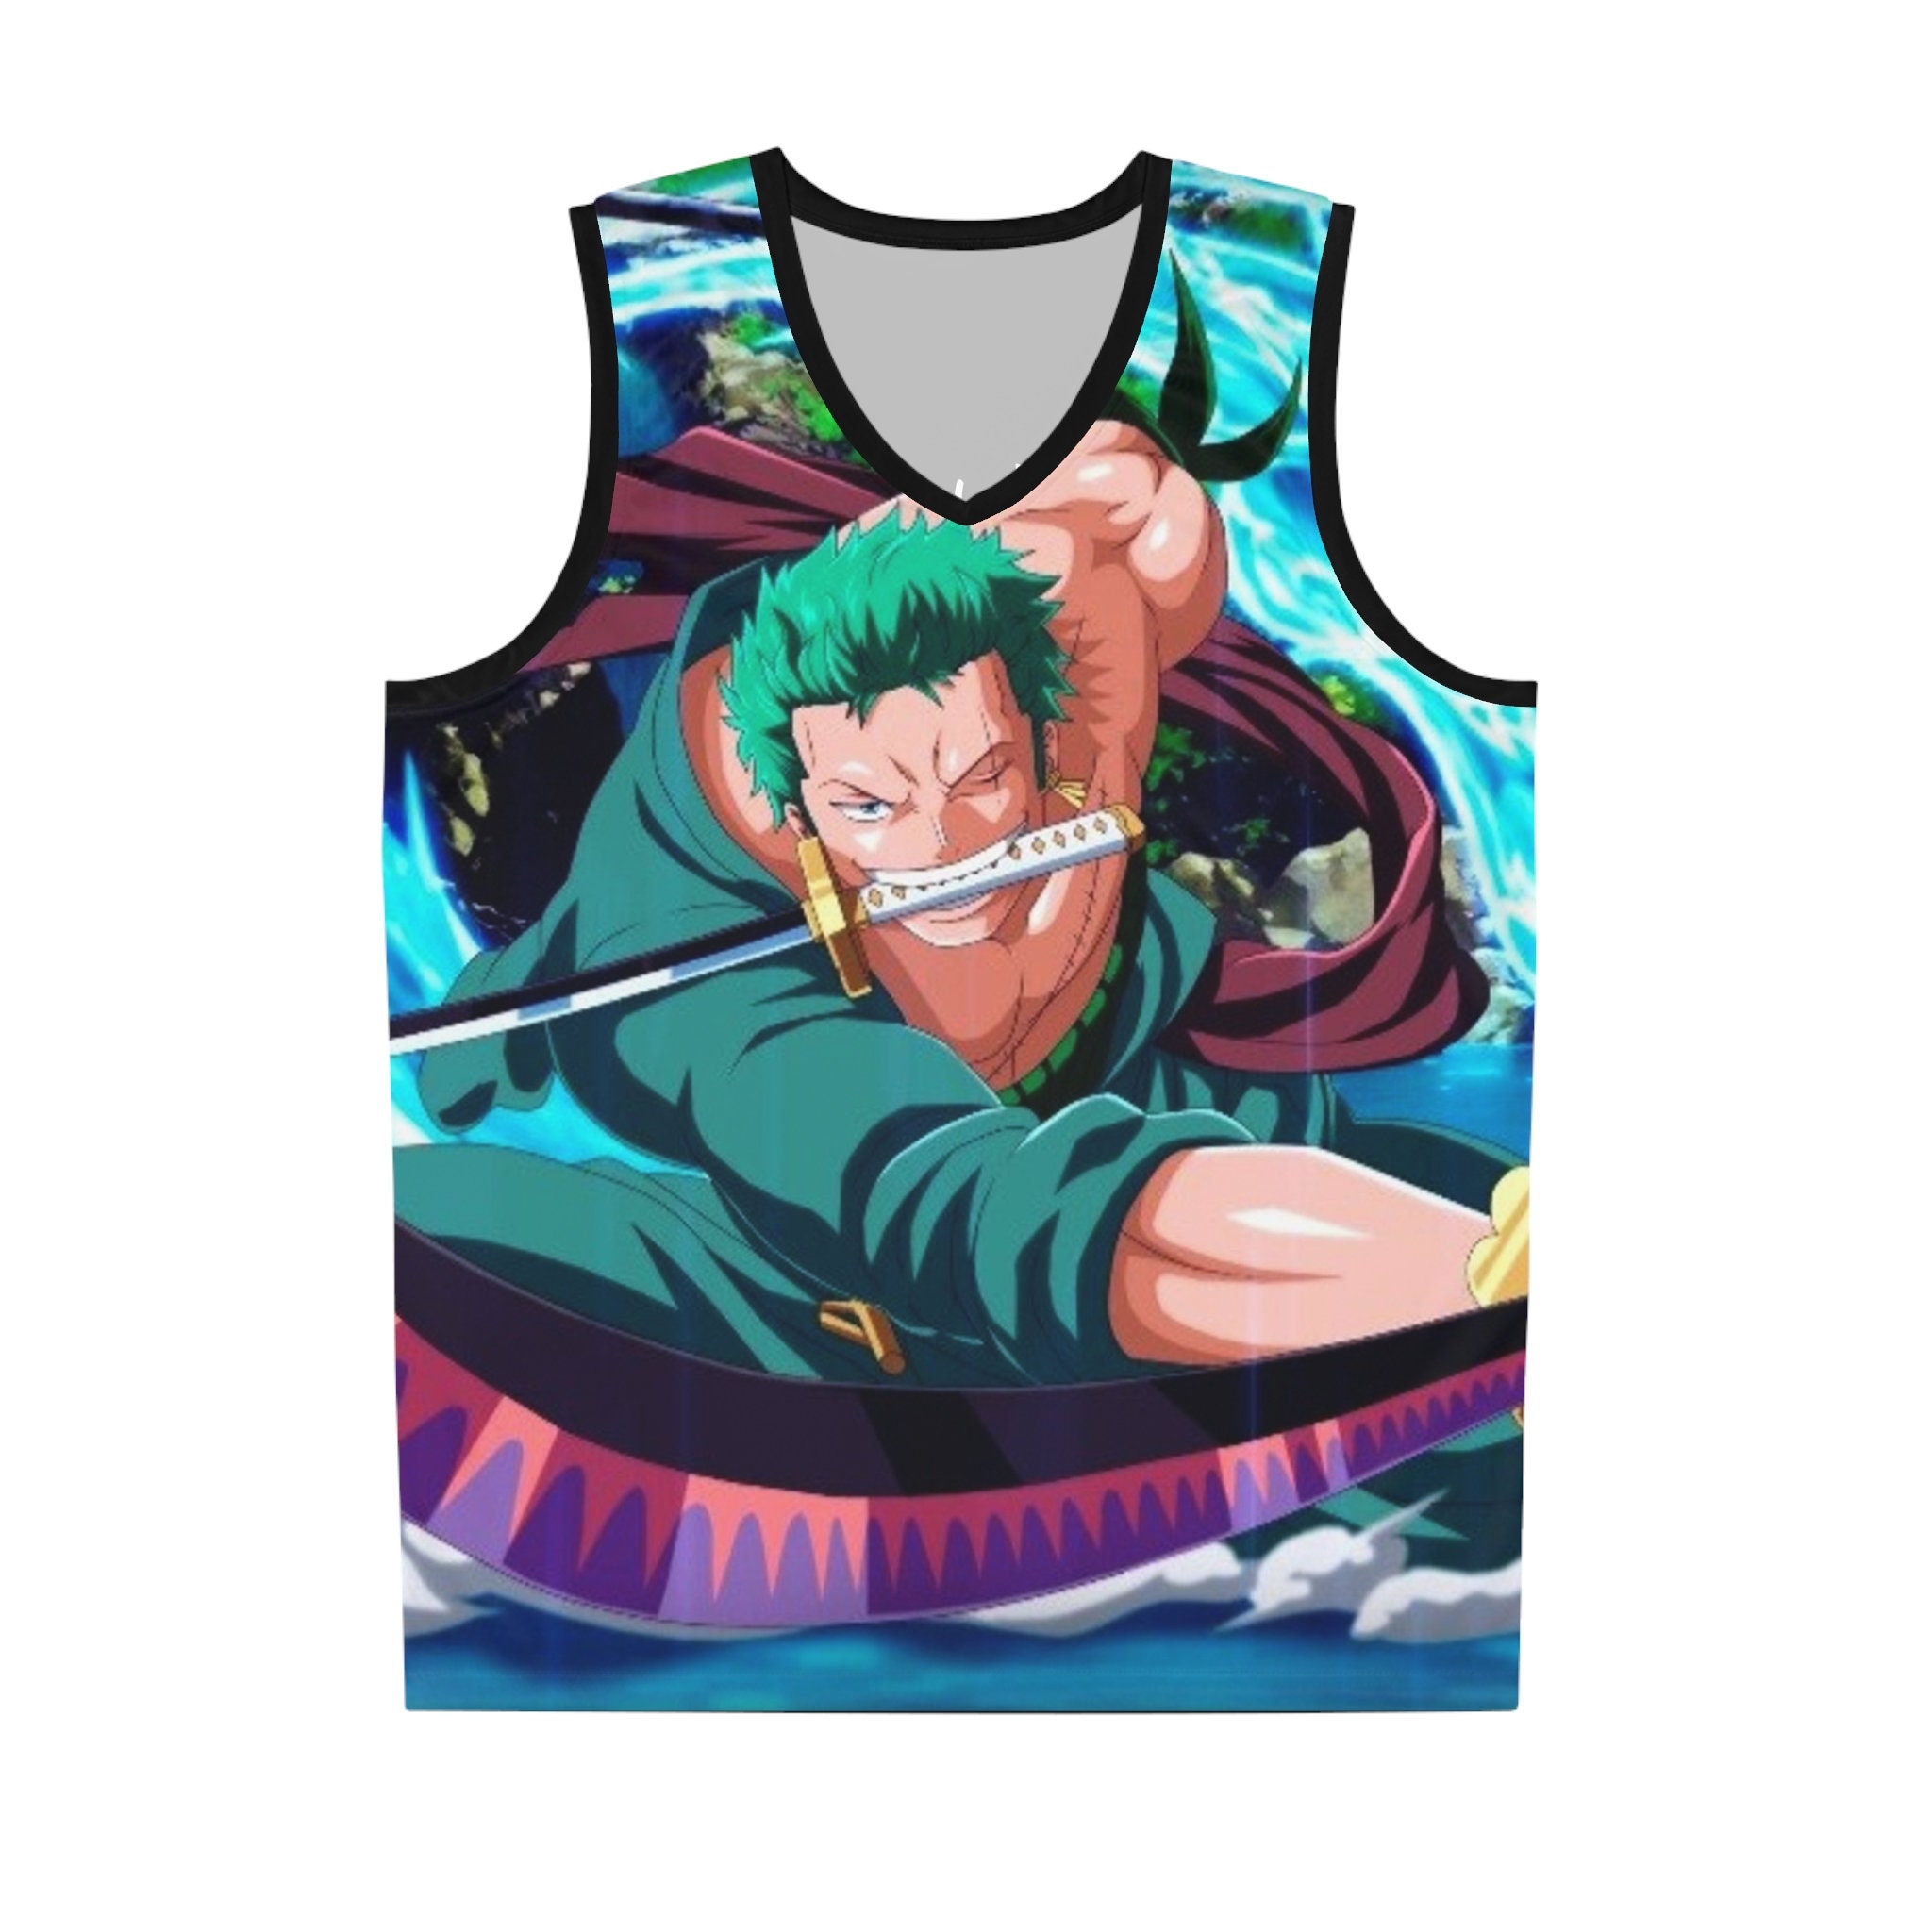 One Piece Anime Design Full Sublimation Basketball Jersey